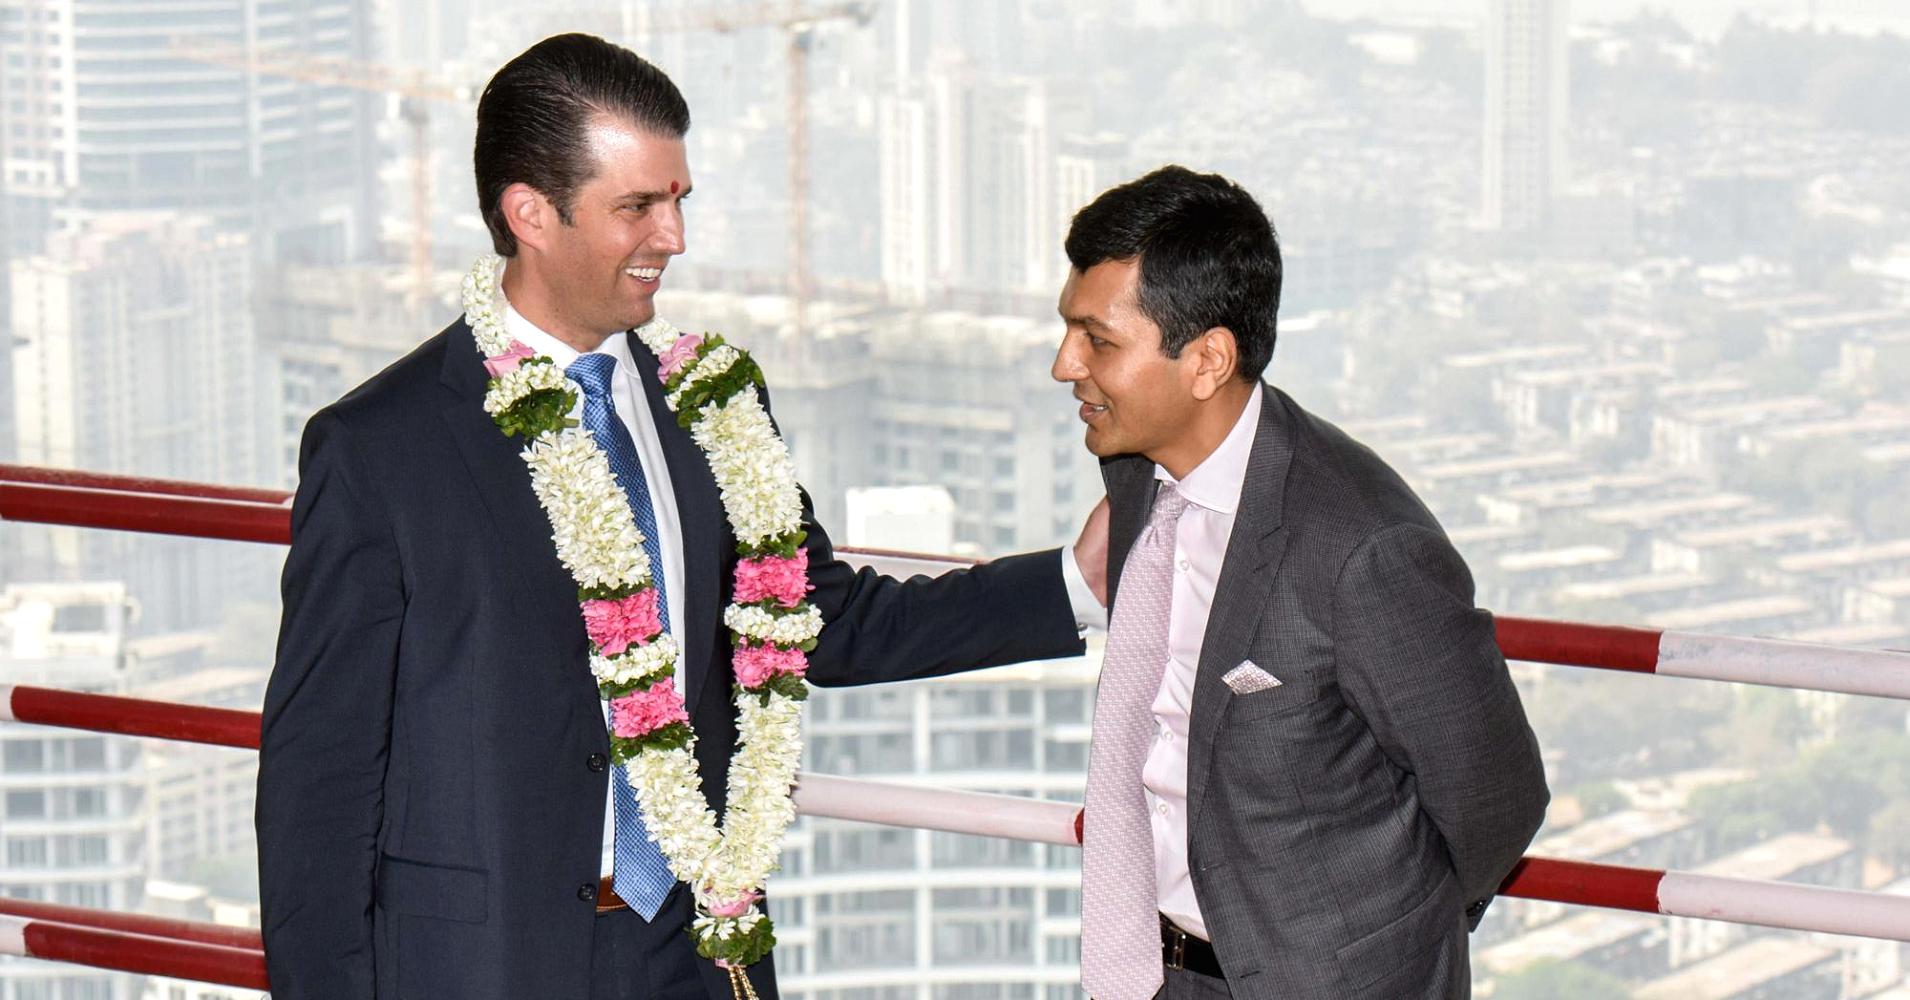 Donald Trump Jr. pushed ‘blatantly illegal’ project In India, former official says